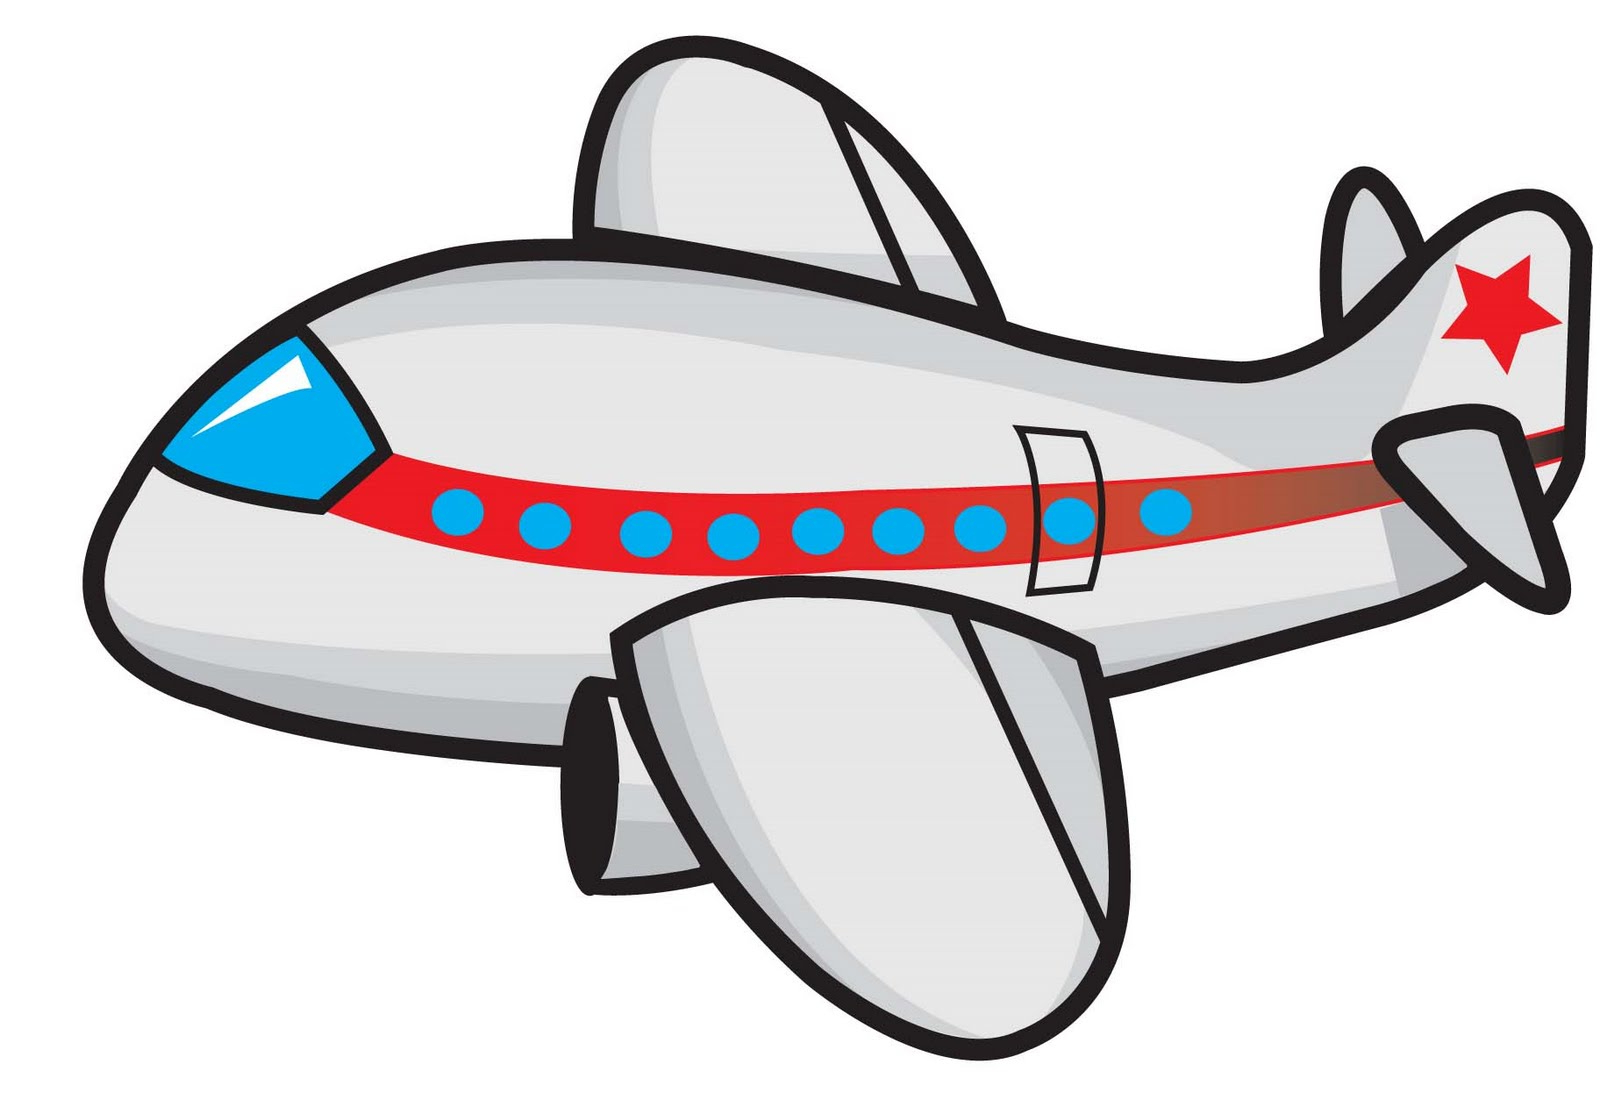 Cartoon Airplane Image Free download on ClipArtMag